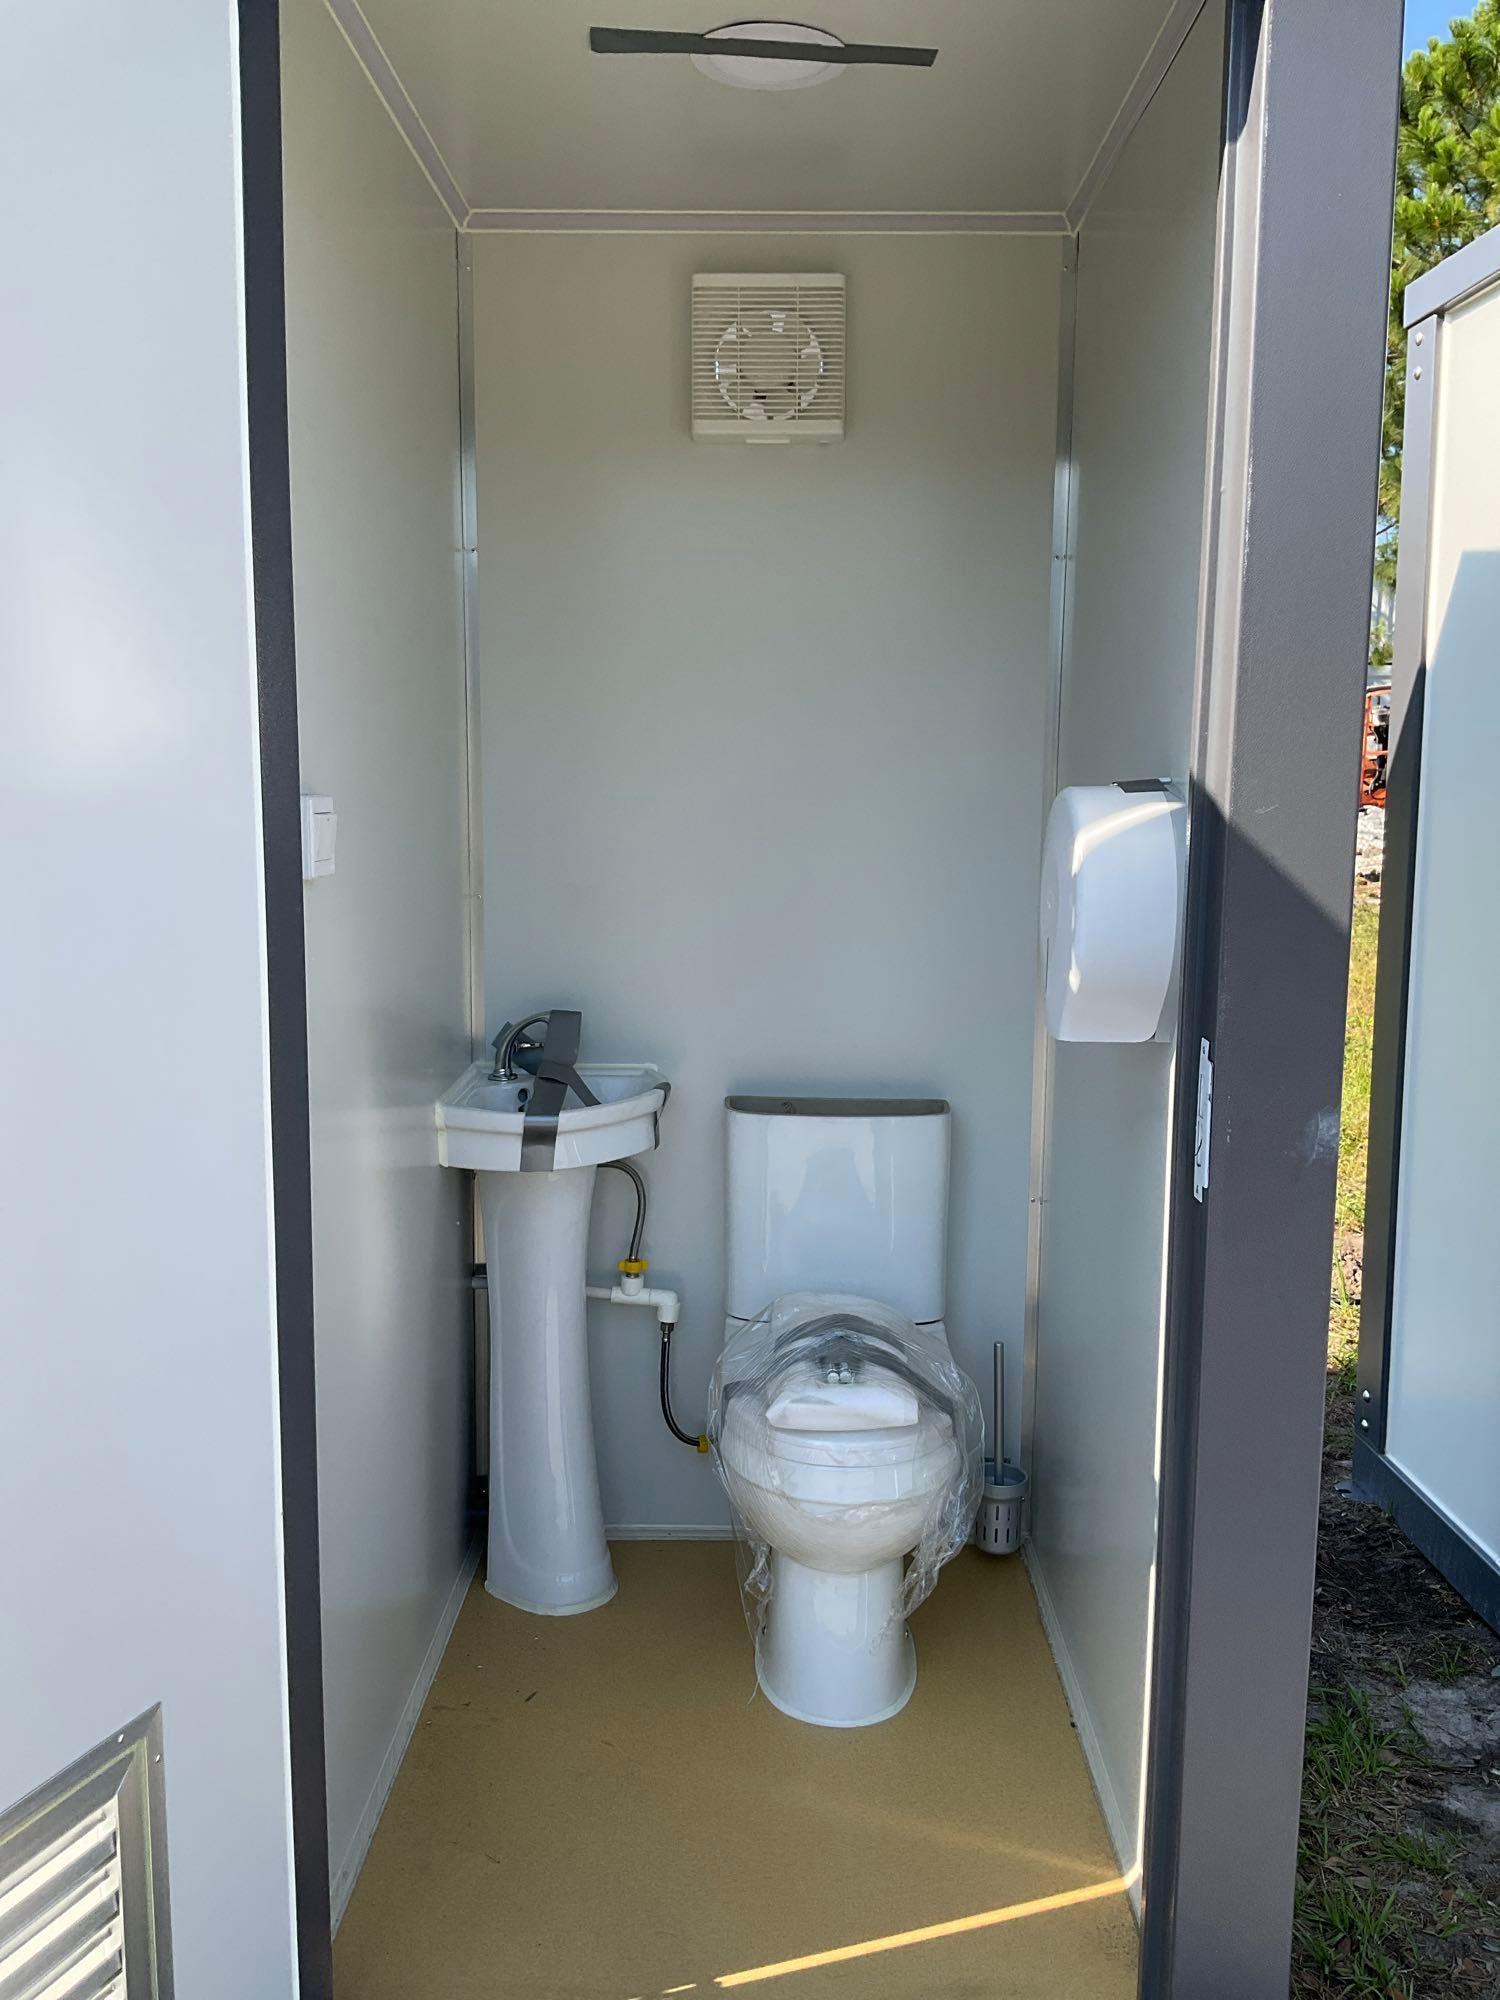 UNUSED PORTABLE DOUBLE BATHROOM UNIT, 2 STALLS, ELECTRIC & PLUMBING HOOK UP WITH EXTERIOR PLUMBING